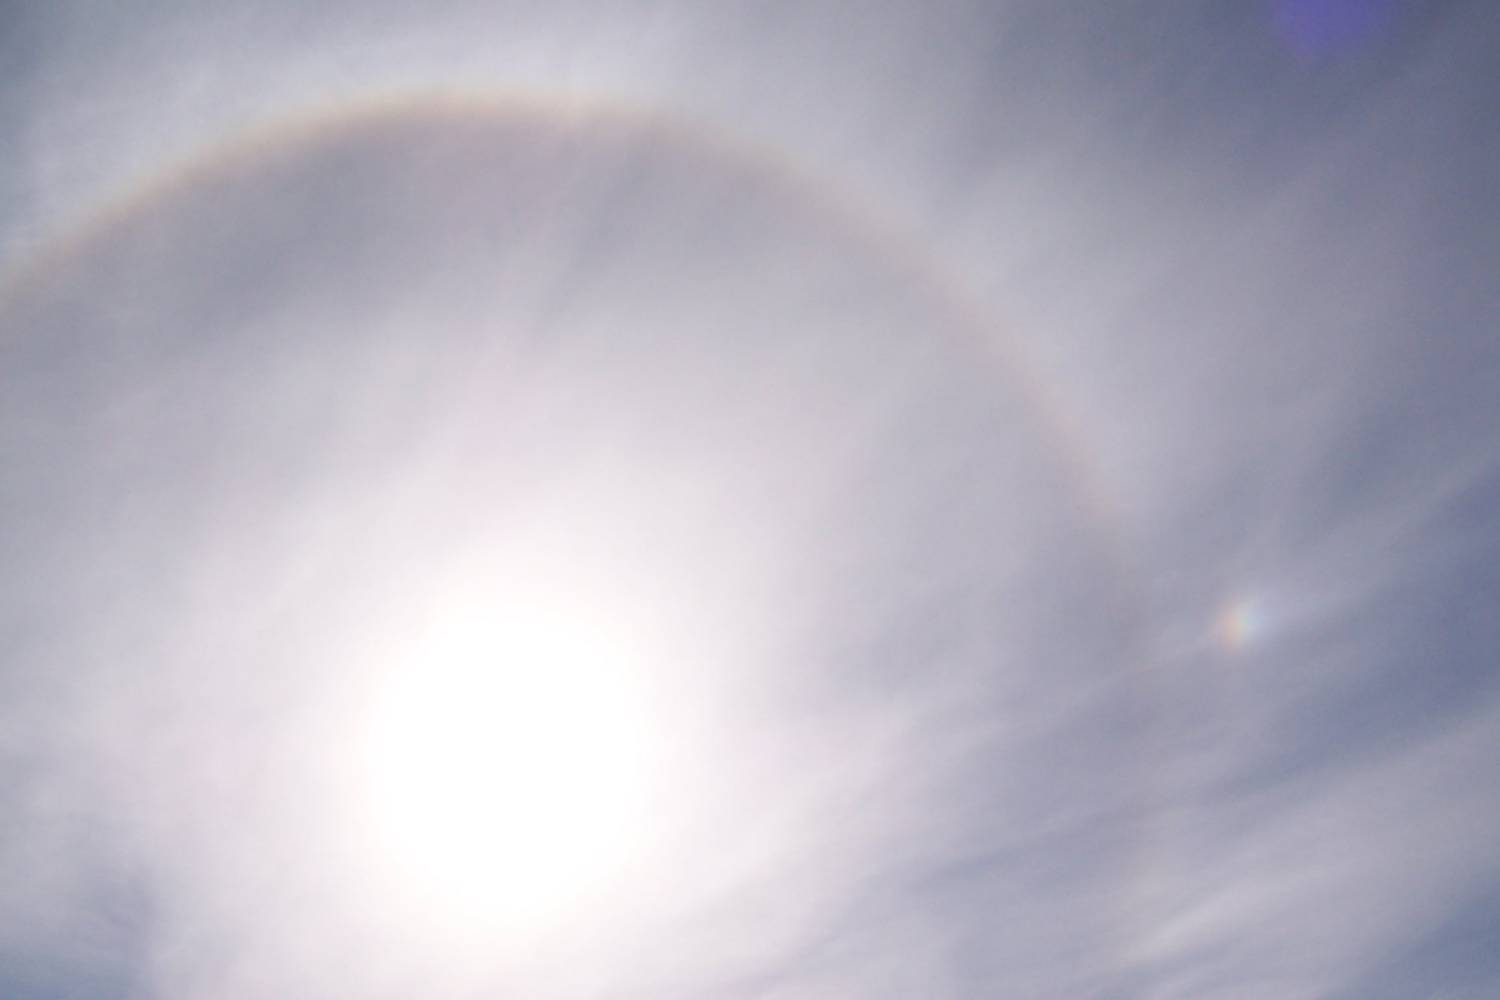 b) Solar circle with parhelic circle and right sundog: 41 KB; click on the image to enlarge